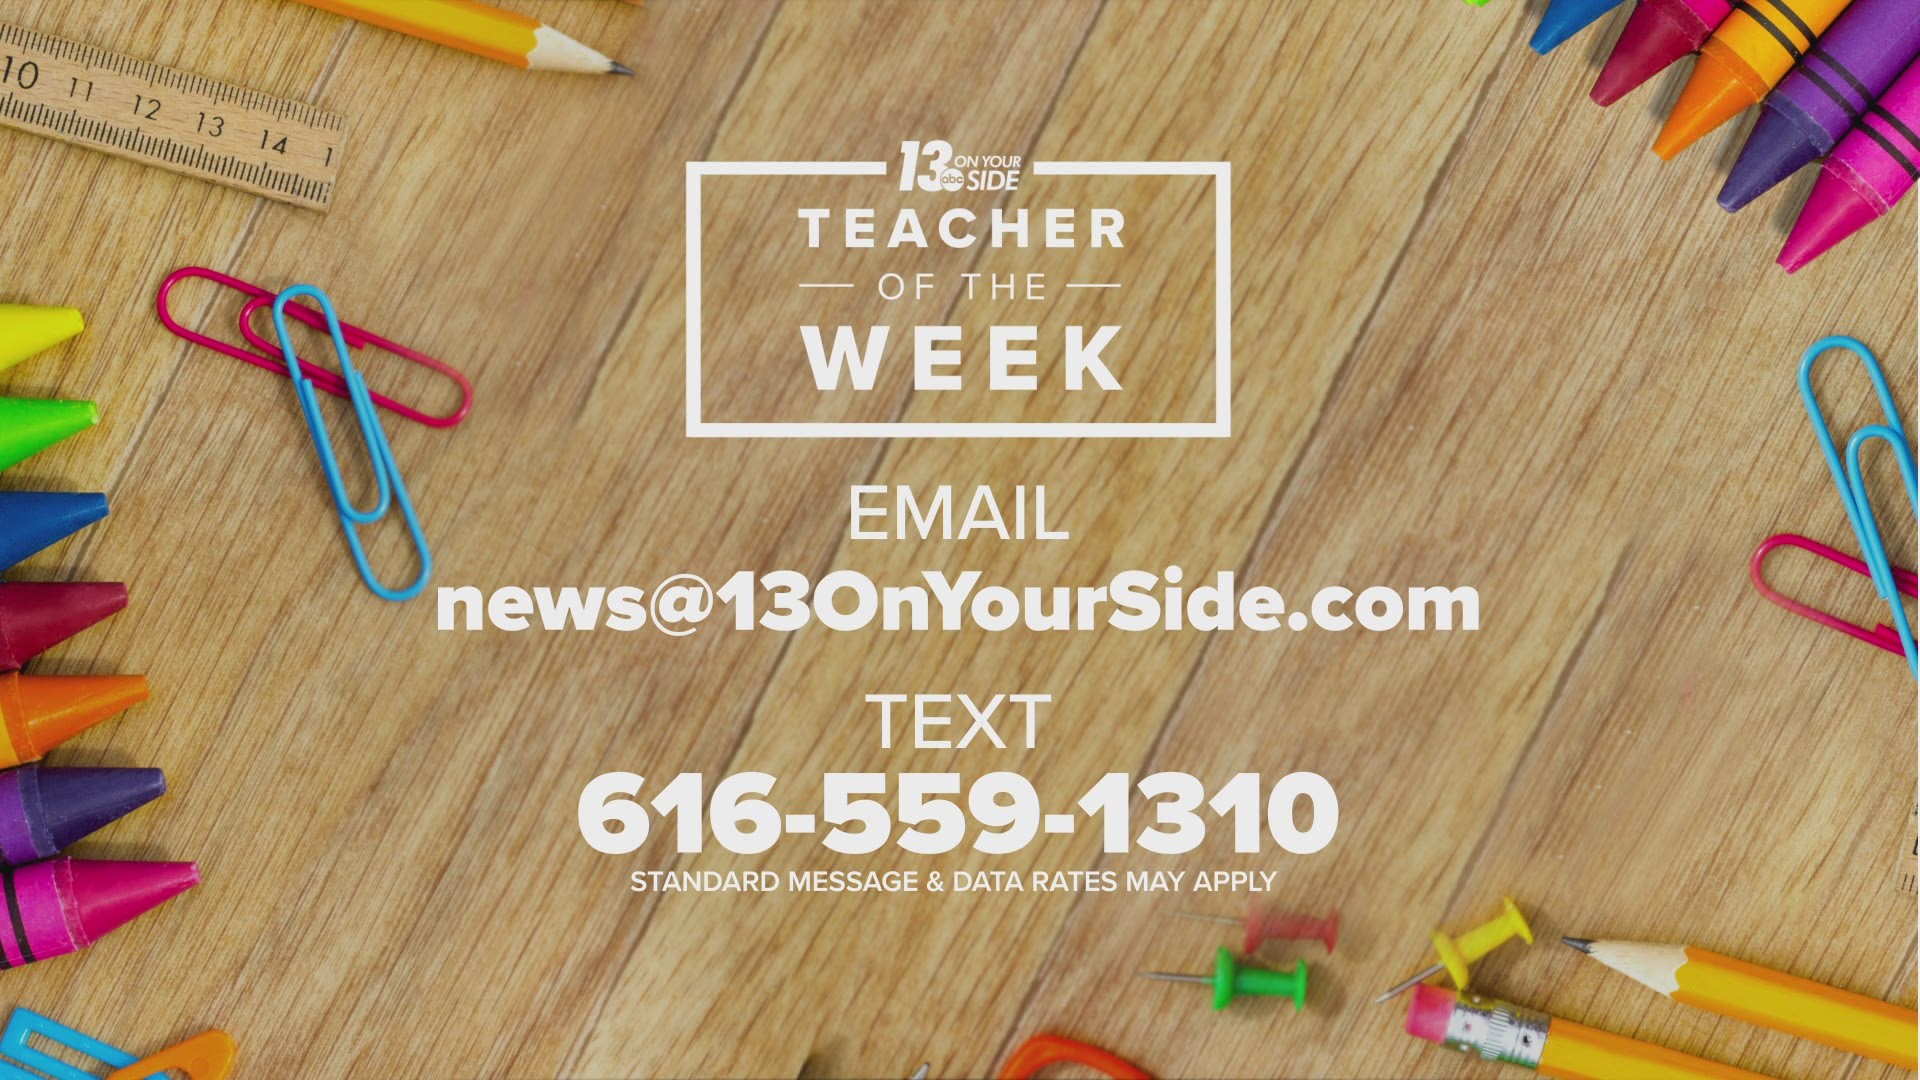 Nominate an awesome teacher for 13 ON YOUR SIDE Morning's Teacher of the Week!